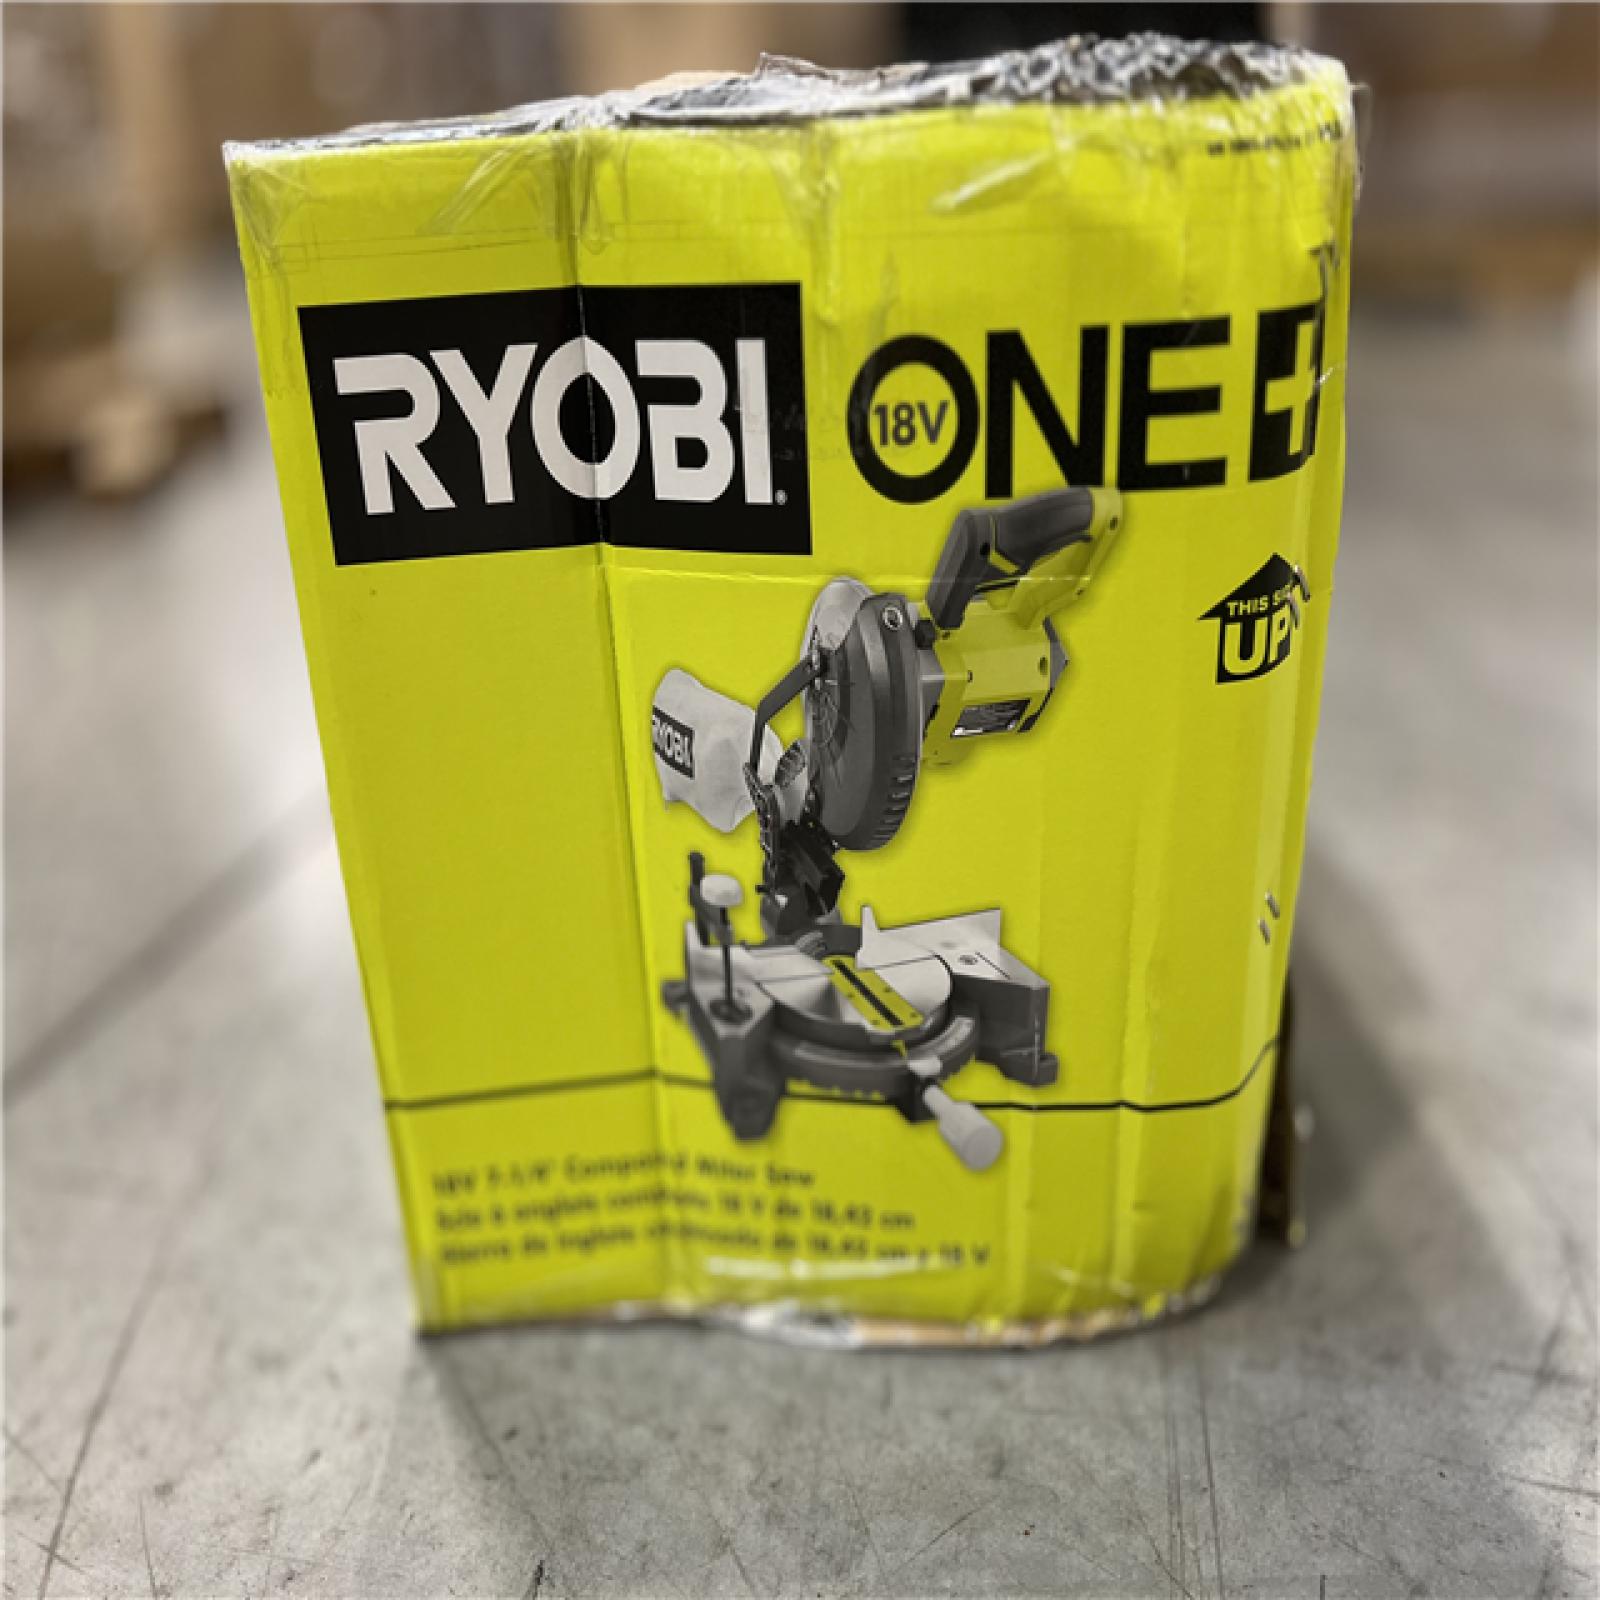 NEW! - RYOBI ONE+ 18V Cordless 7-1/4 in. Compound Miter Saw (Tool Only)